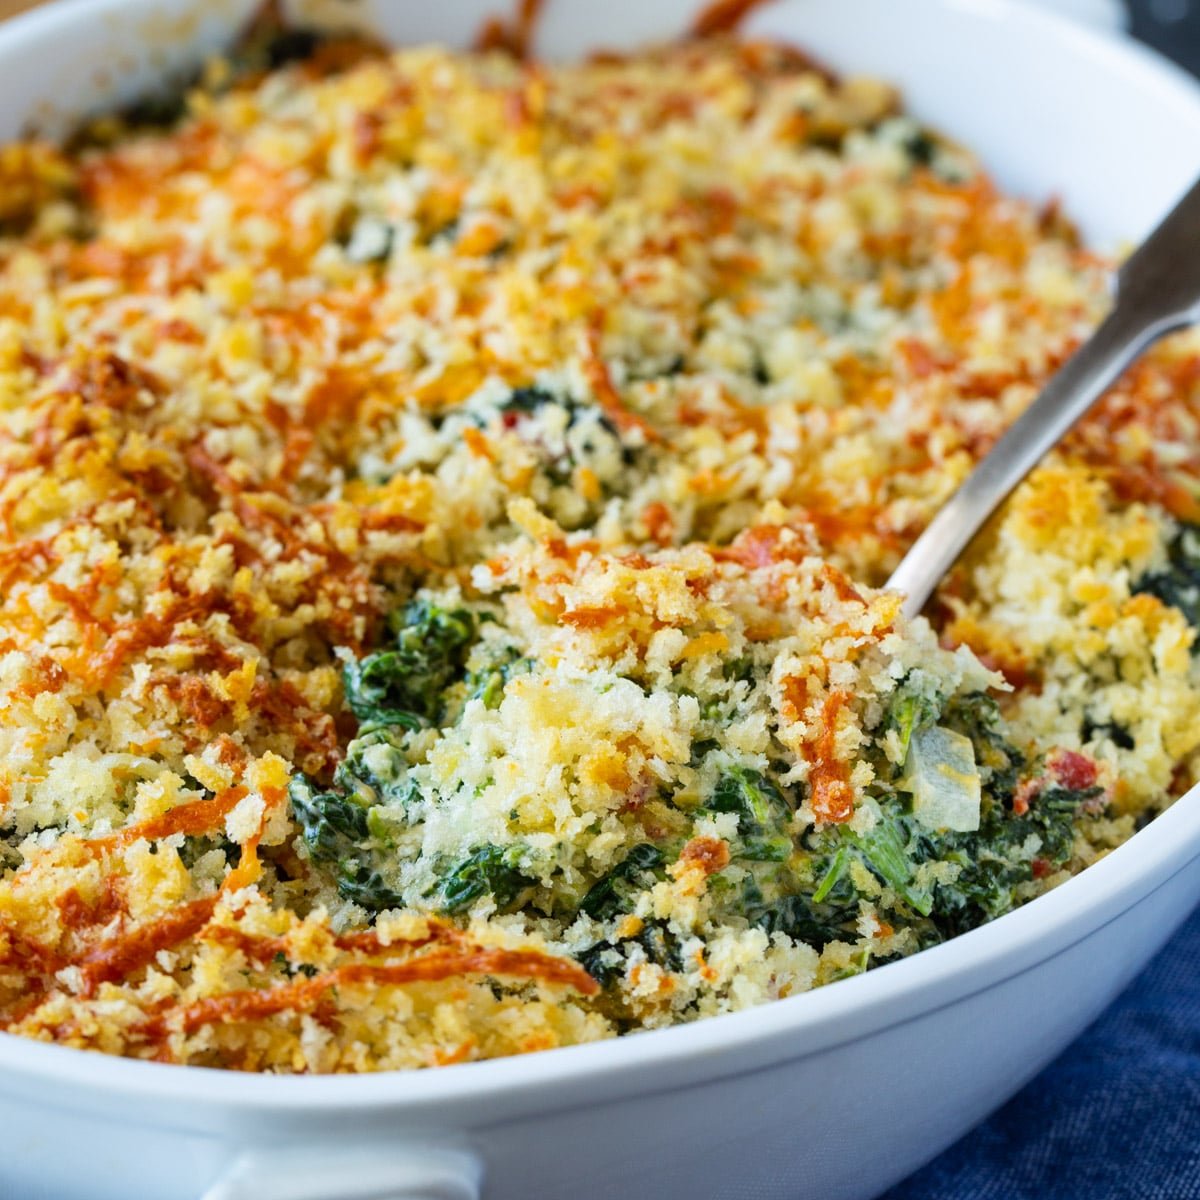 Spoon scooping Pimento Cheese Creamed Spinach out of baking dish.